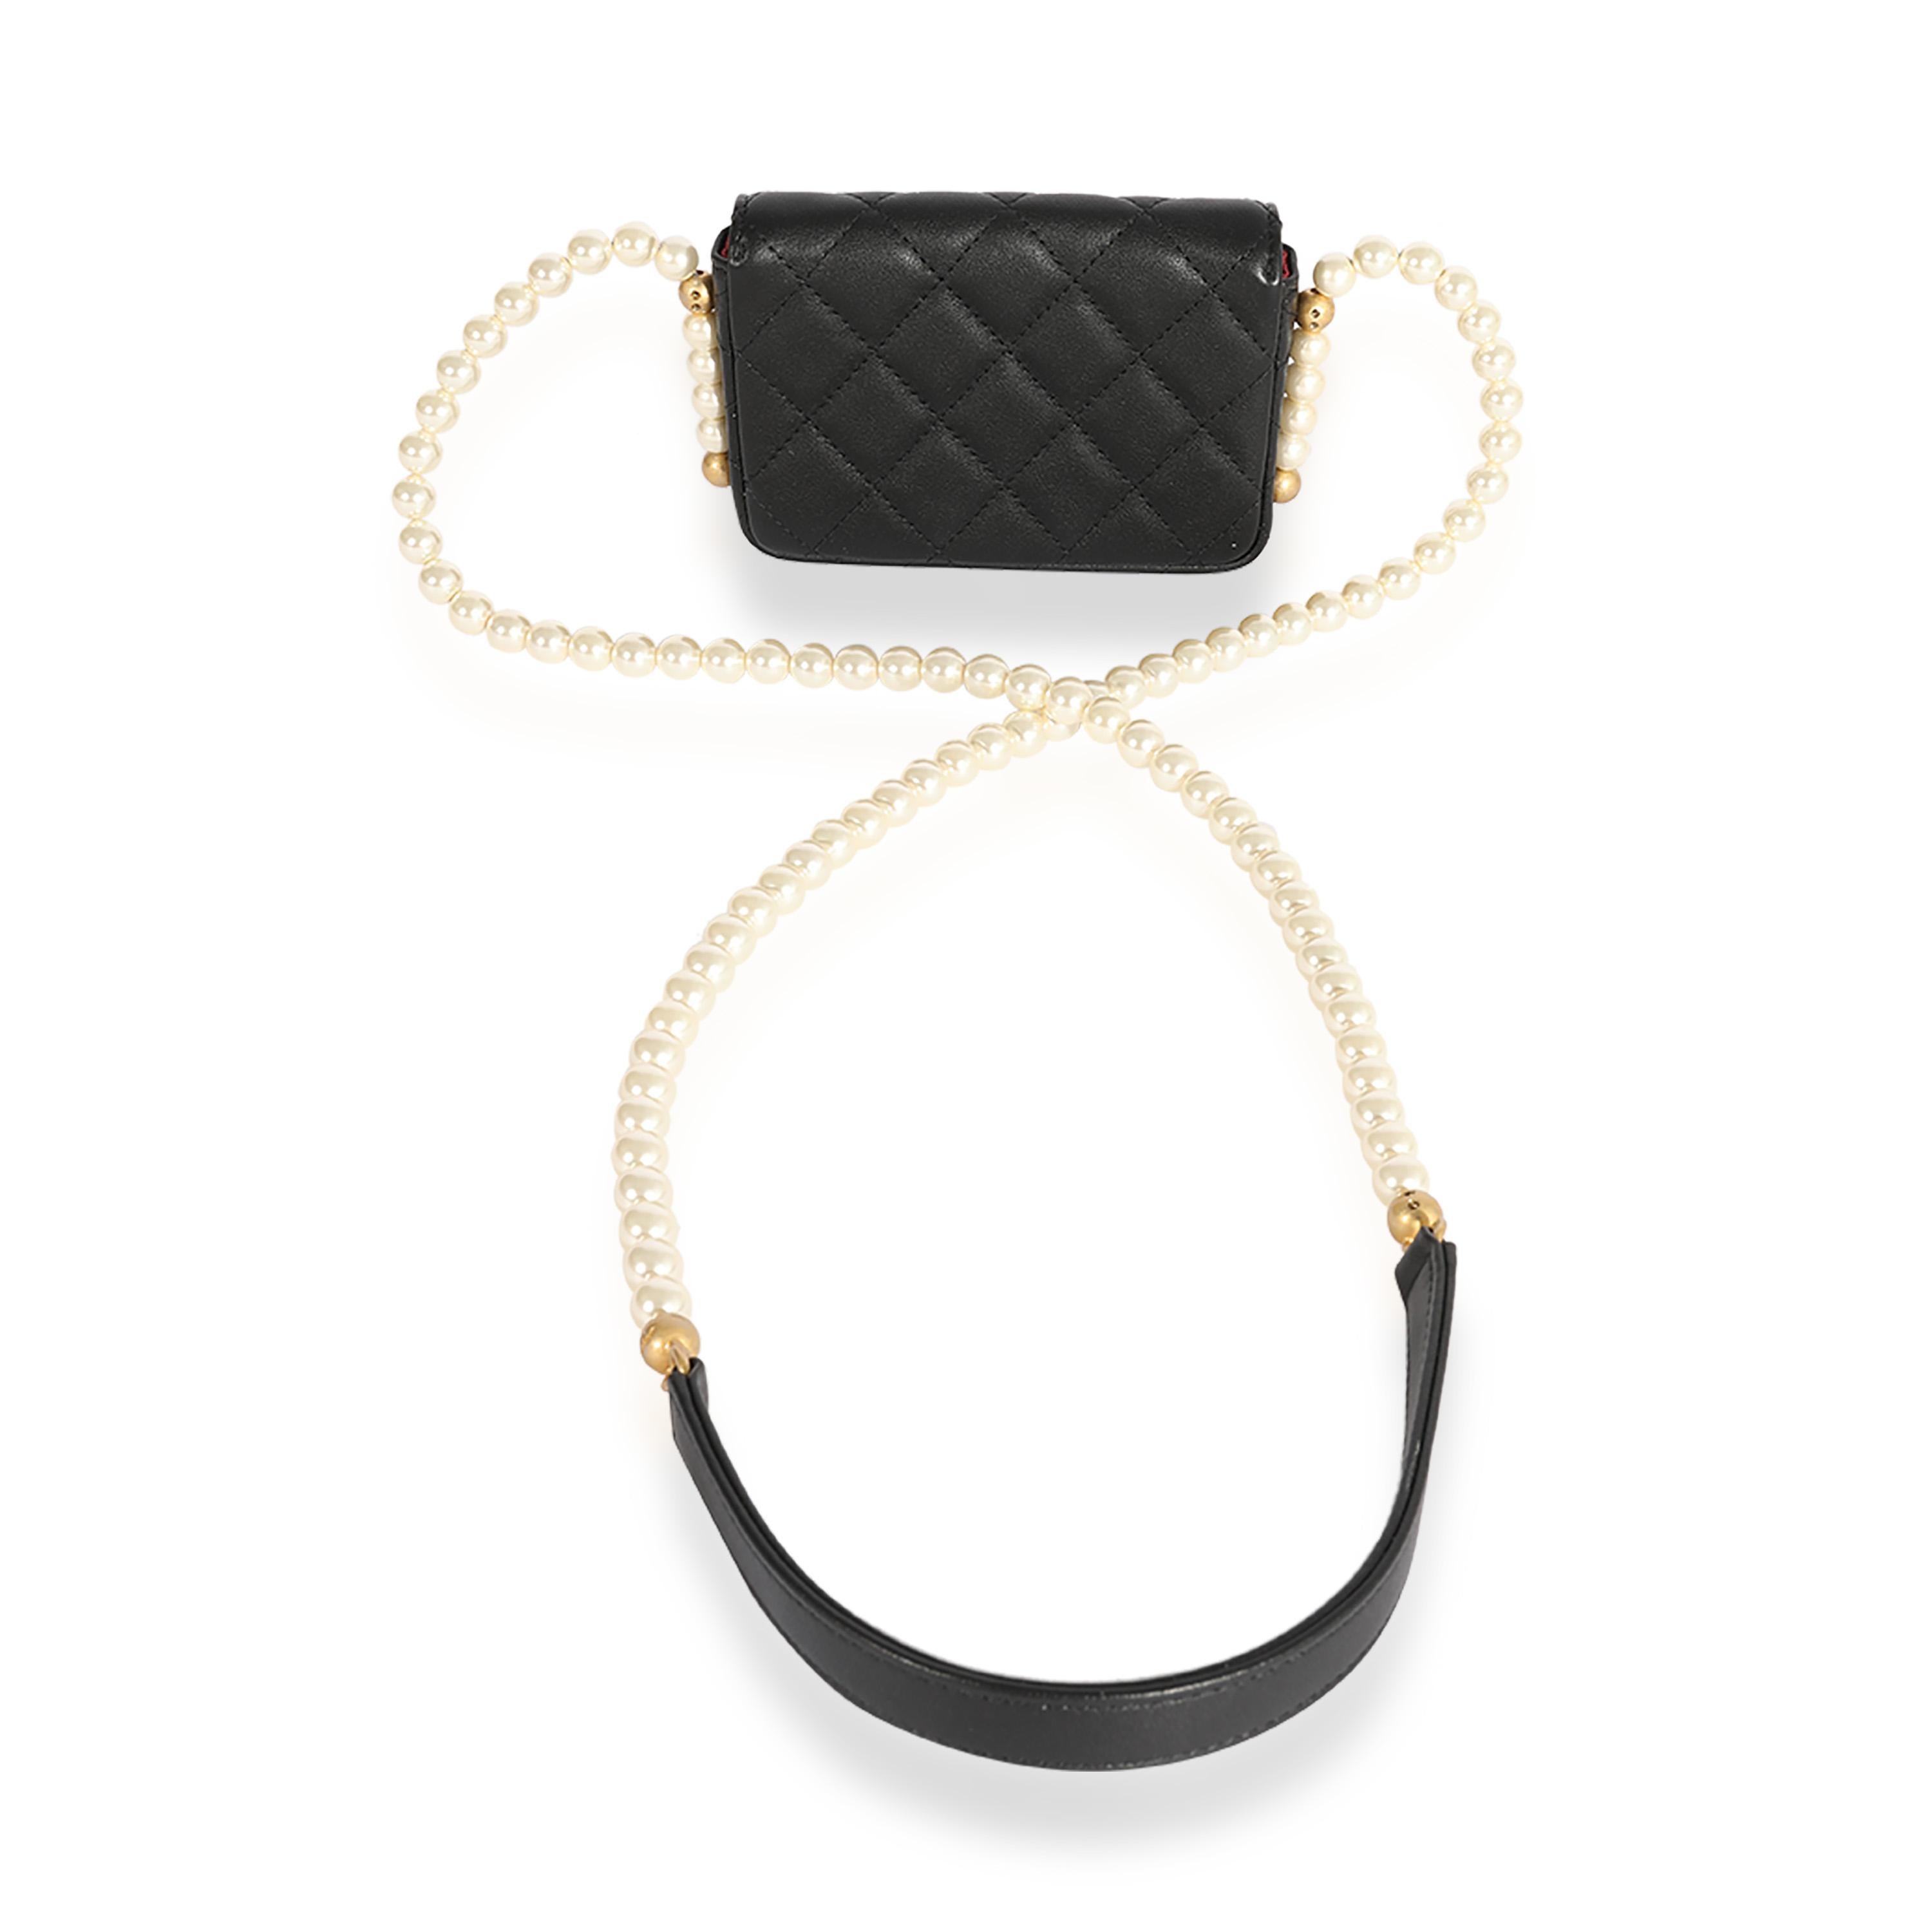 Beige Chanel Black Quilted Lambskin Quilted About Pearls Mini Bag